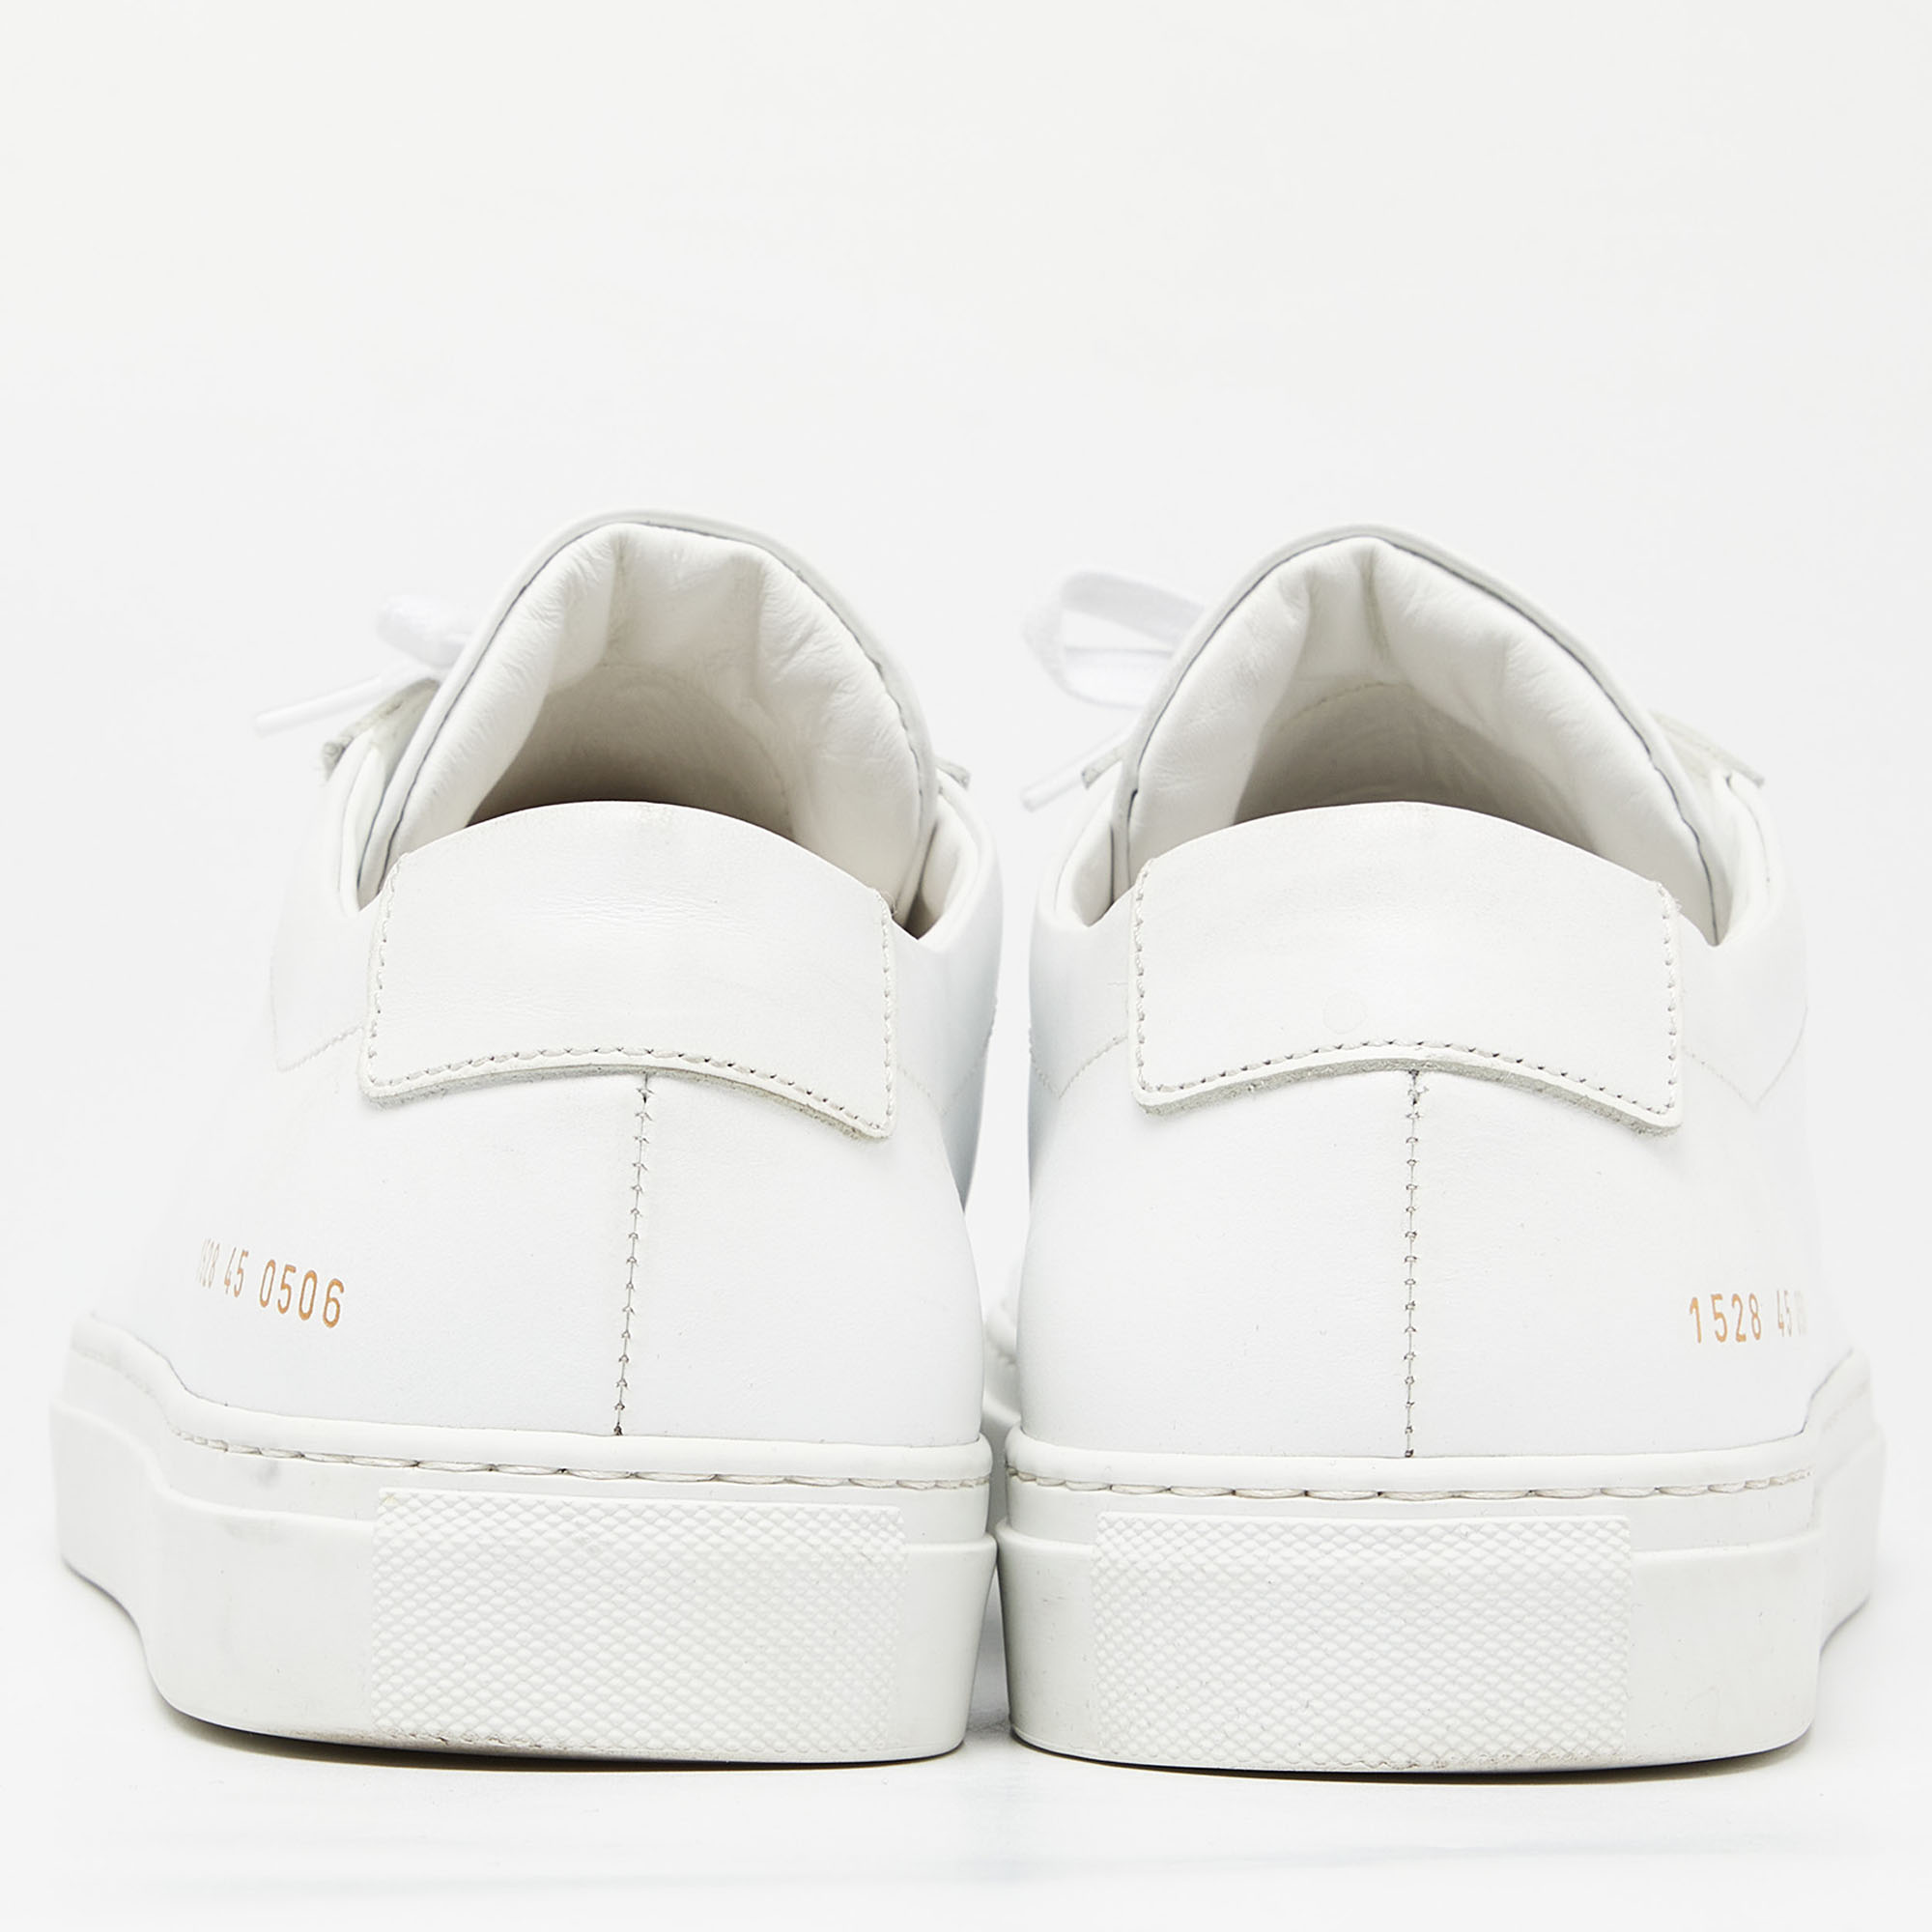 Common Projects White Leather Achilles Sneakers Size 45